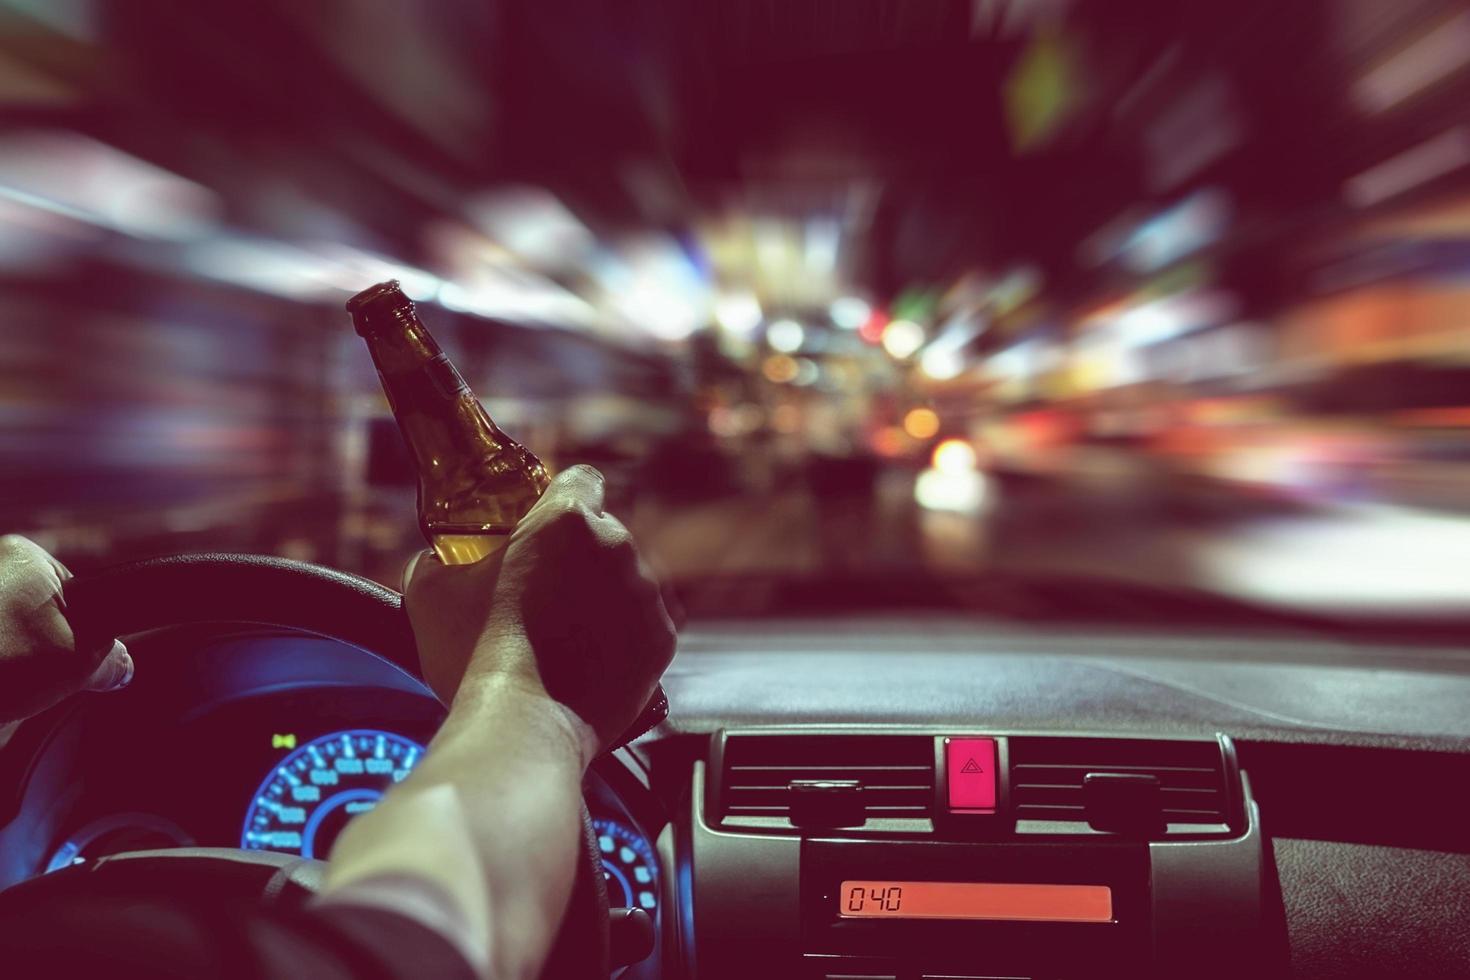 Man drink beer while driving at night in the city dangerously, left hand drive system photo